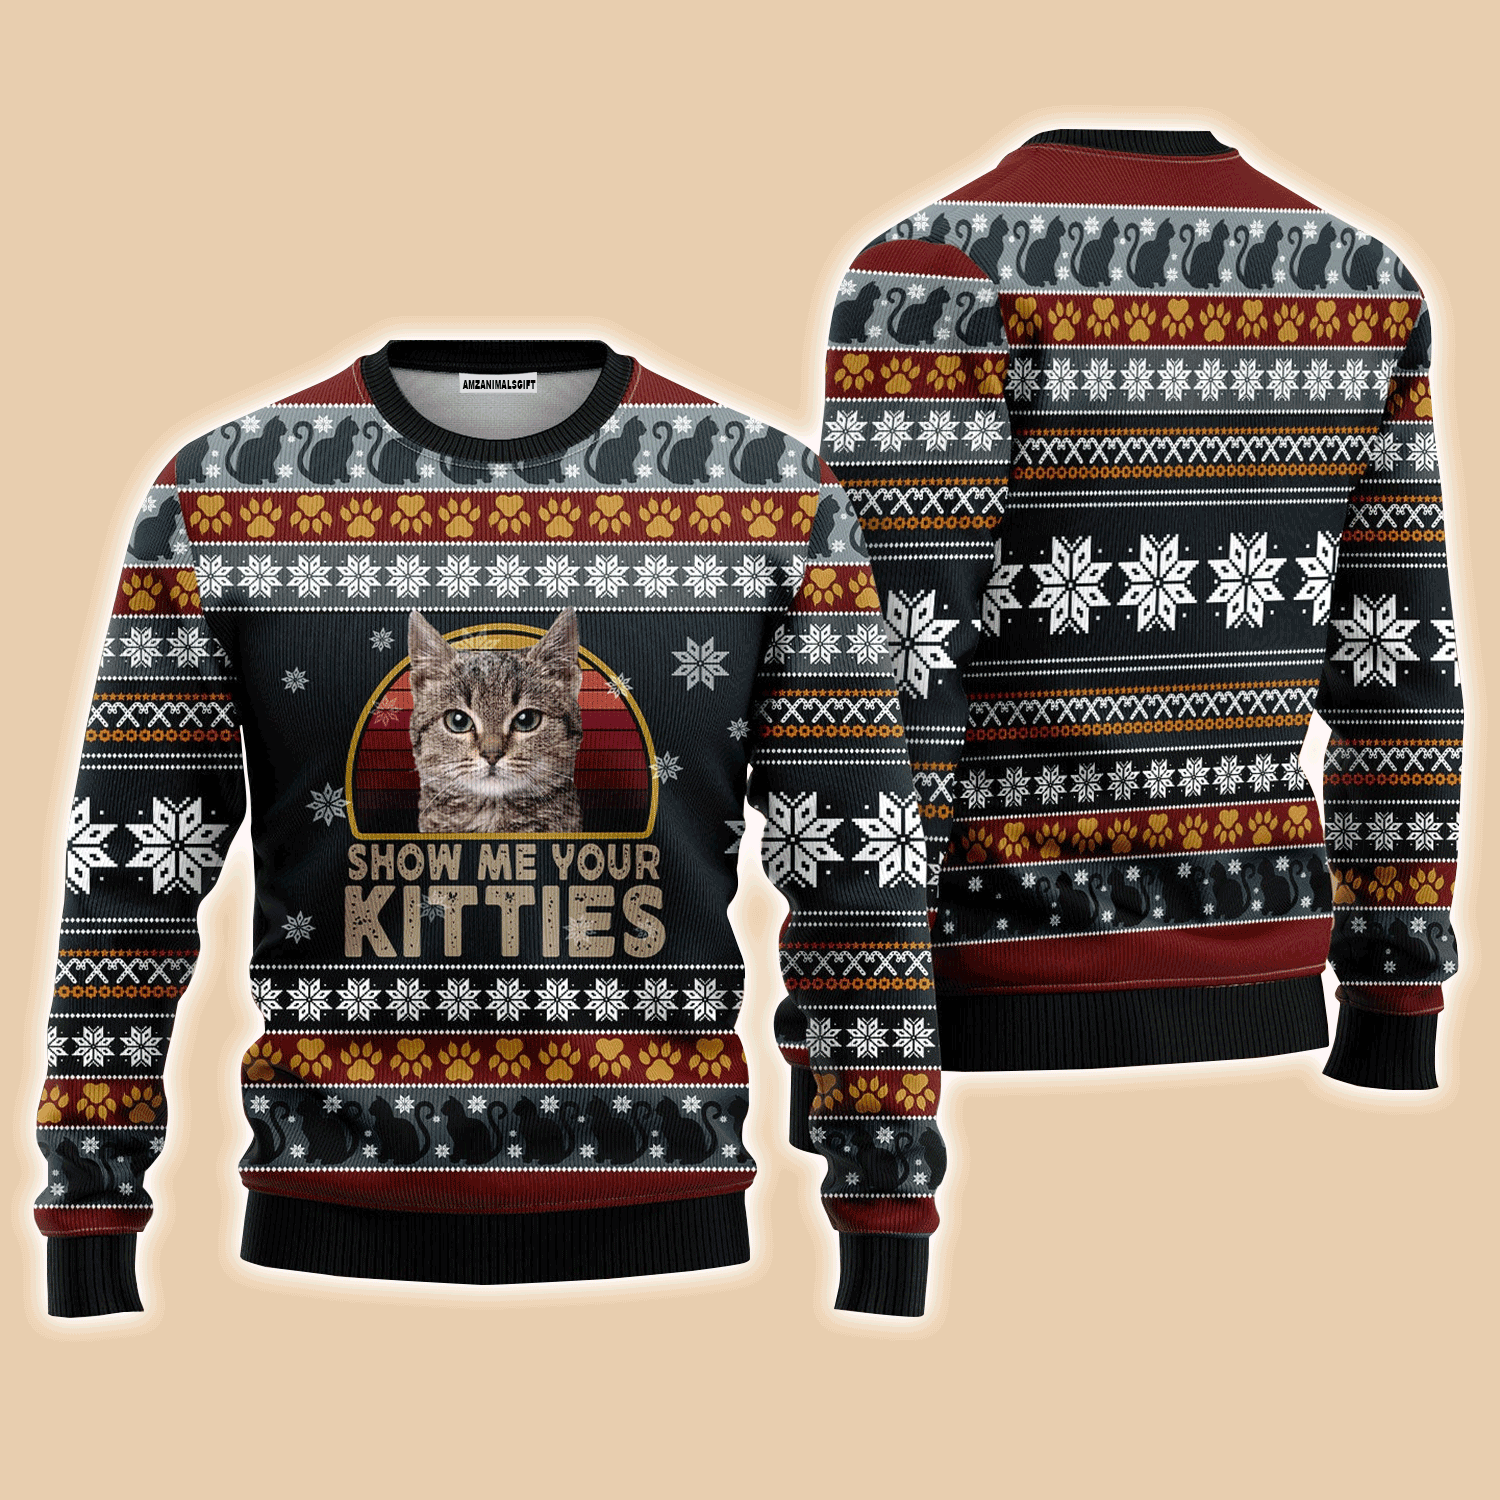 Kitties Christmas Sweater - Show Me Your Kitties Ugly Christmas Sweater For Men & Women - Perfect Outfit For Christmas New Year Autumn Winter